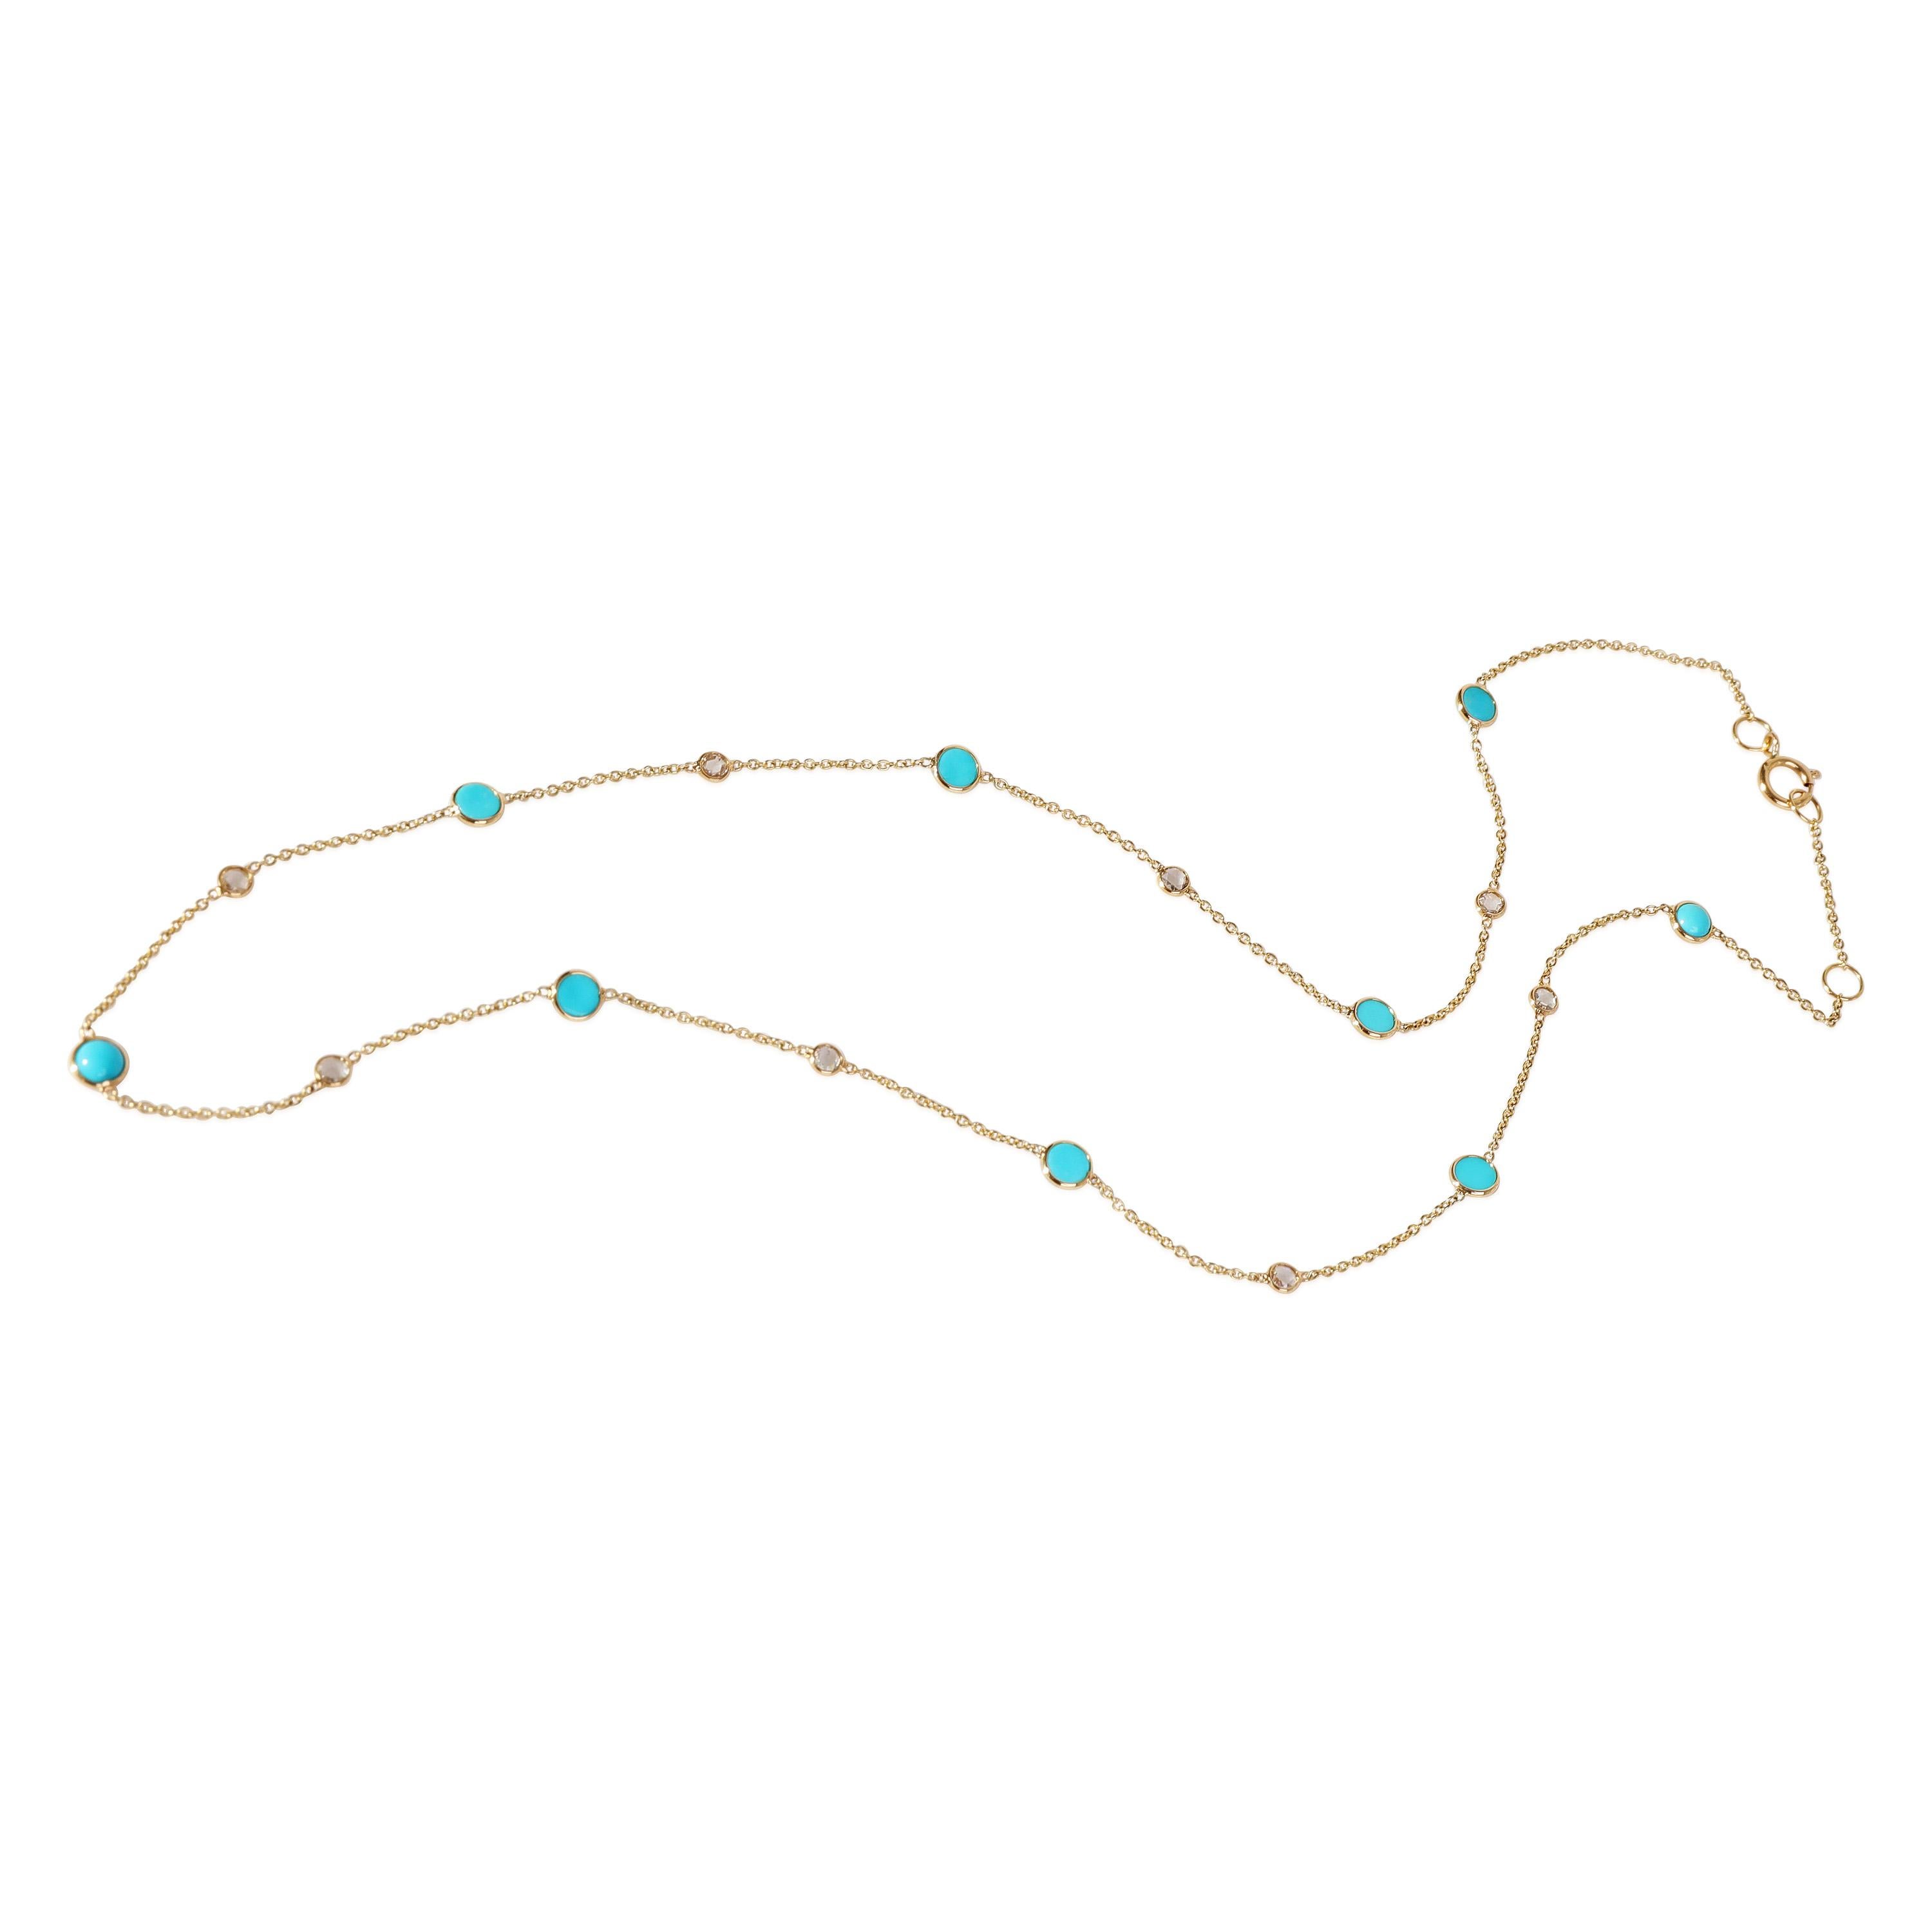 Turquoise Diamond Station Necklace in 18k Yellow Gold 0.09 CTW In Excellent Condition For Sale In New York, NY